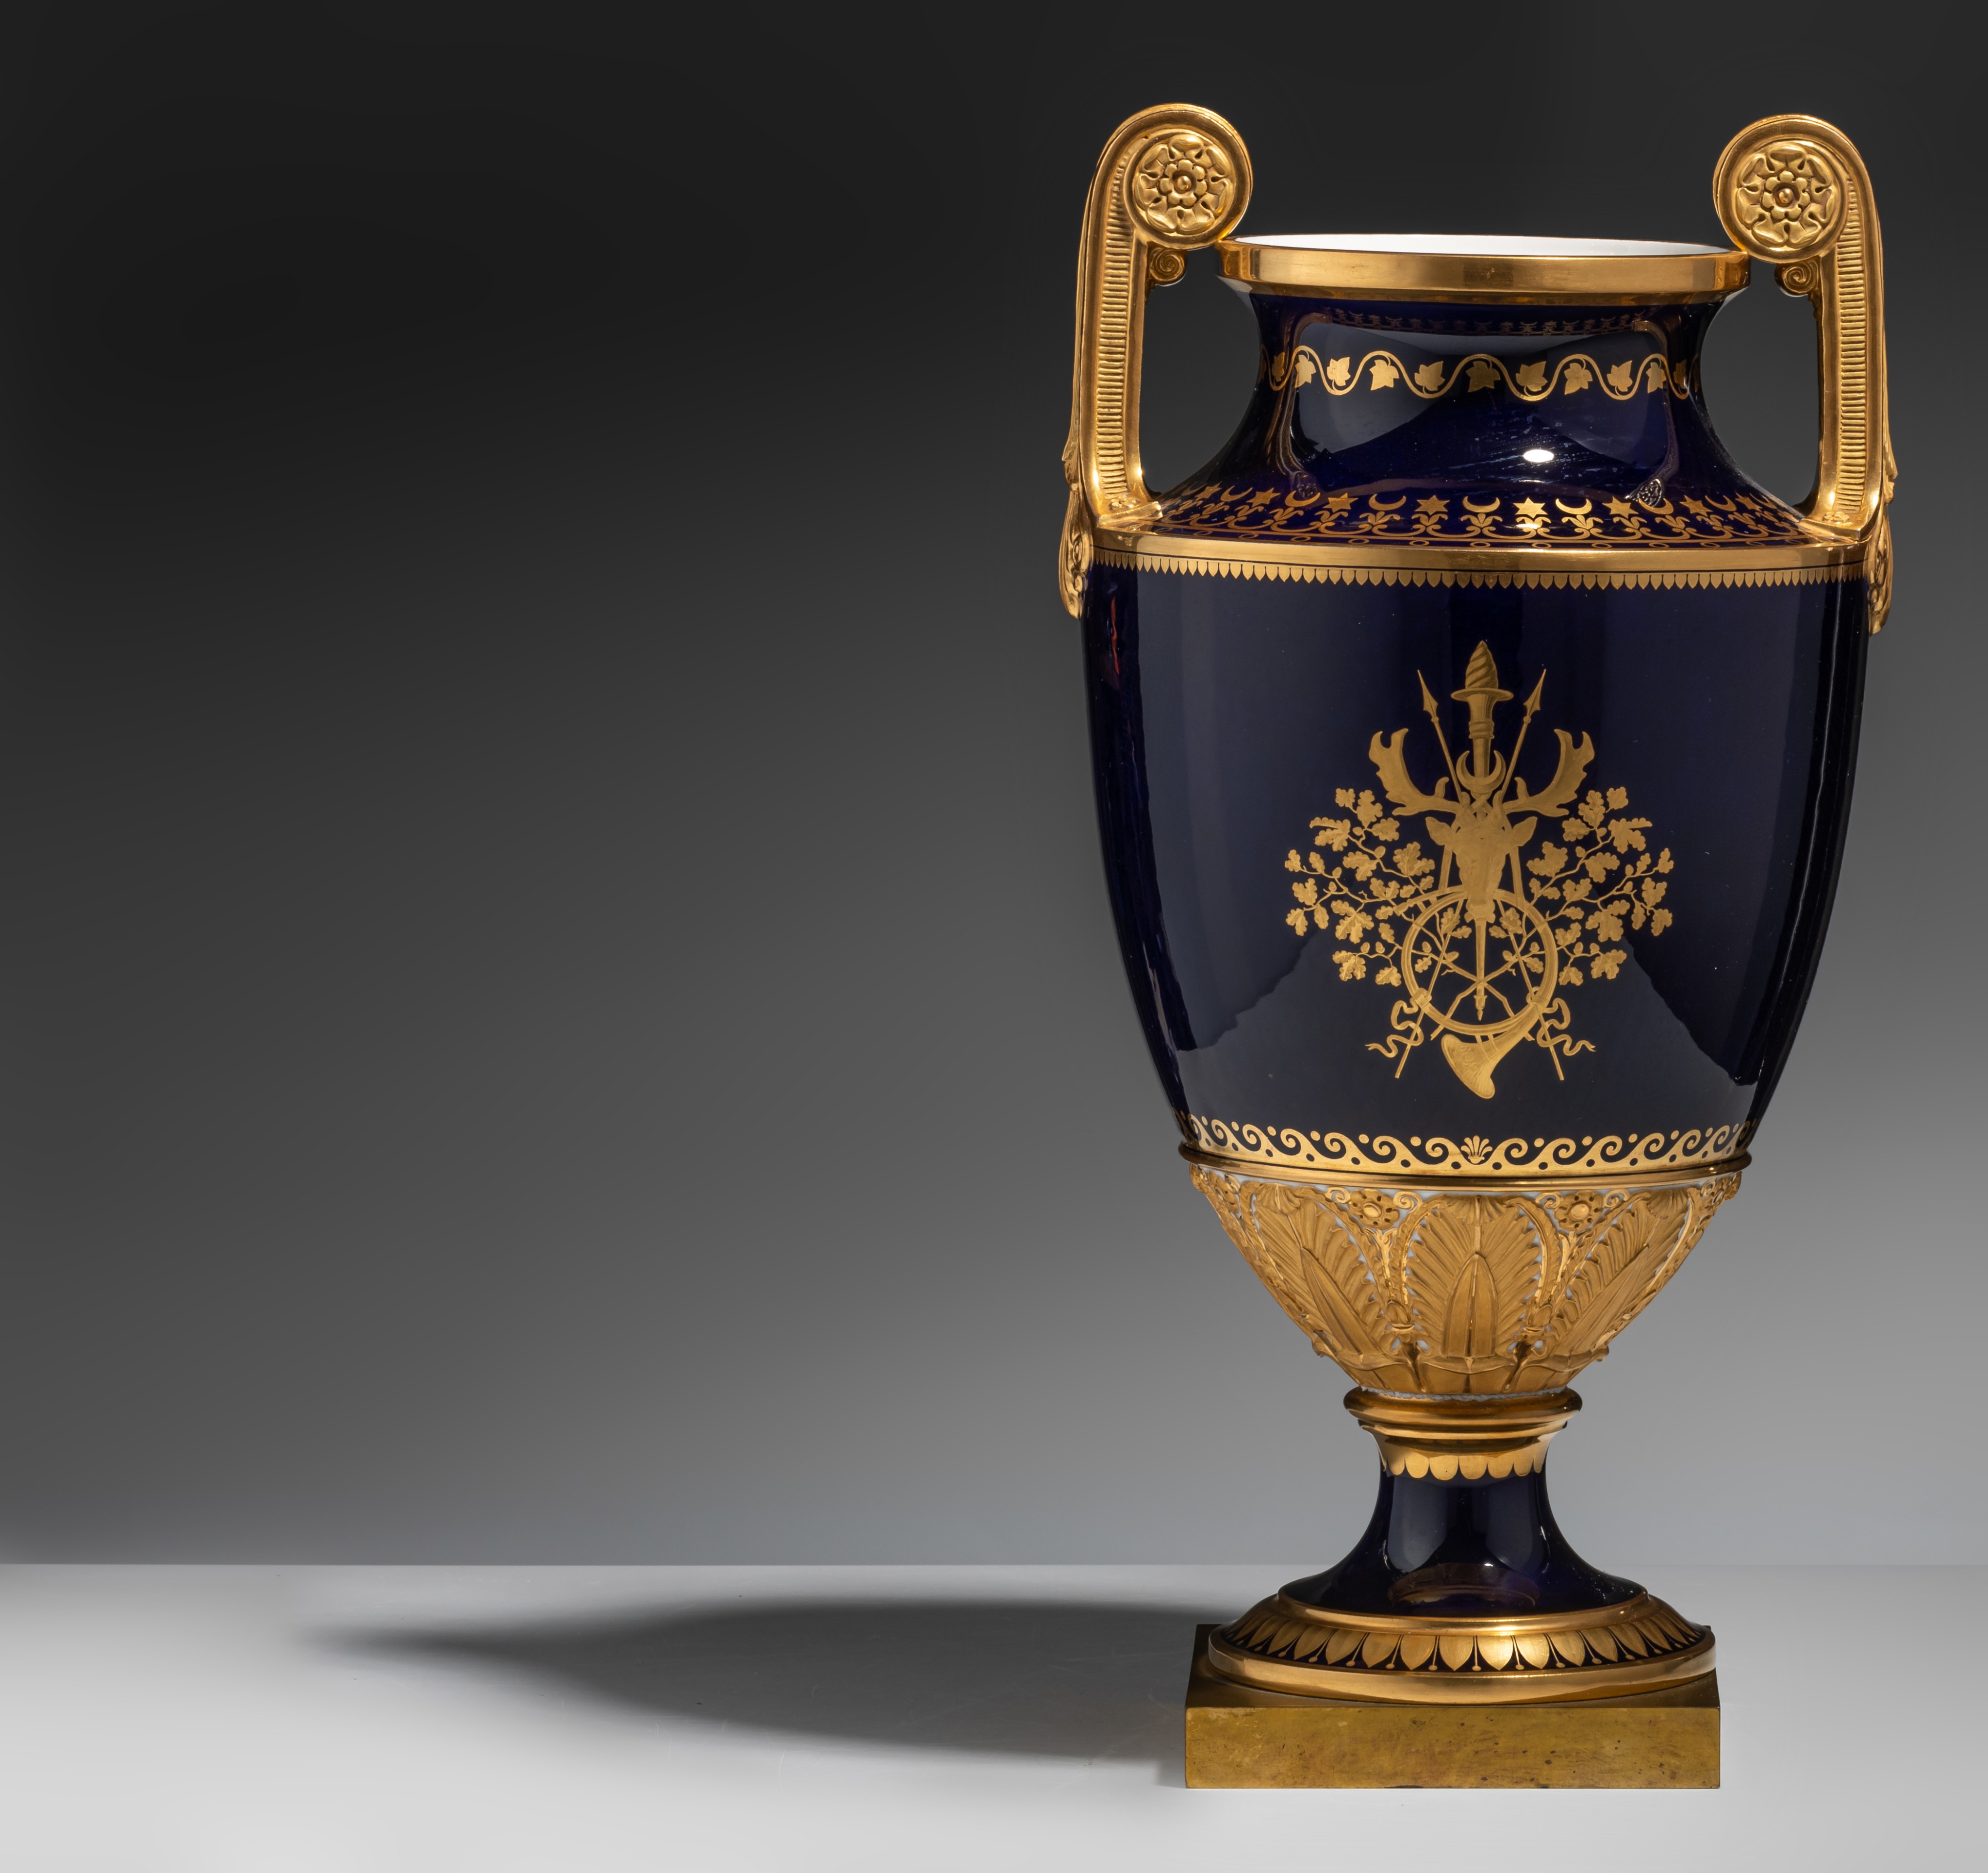 A very fine Empire Sèvres porcelain vase by Jean Charles Develly (1783-1862), 1819, H 44,5 cm - Image 4 of 7